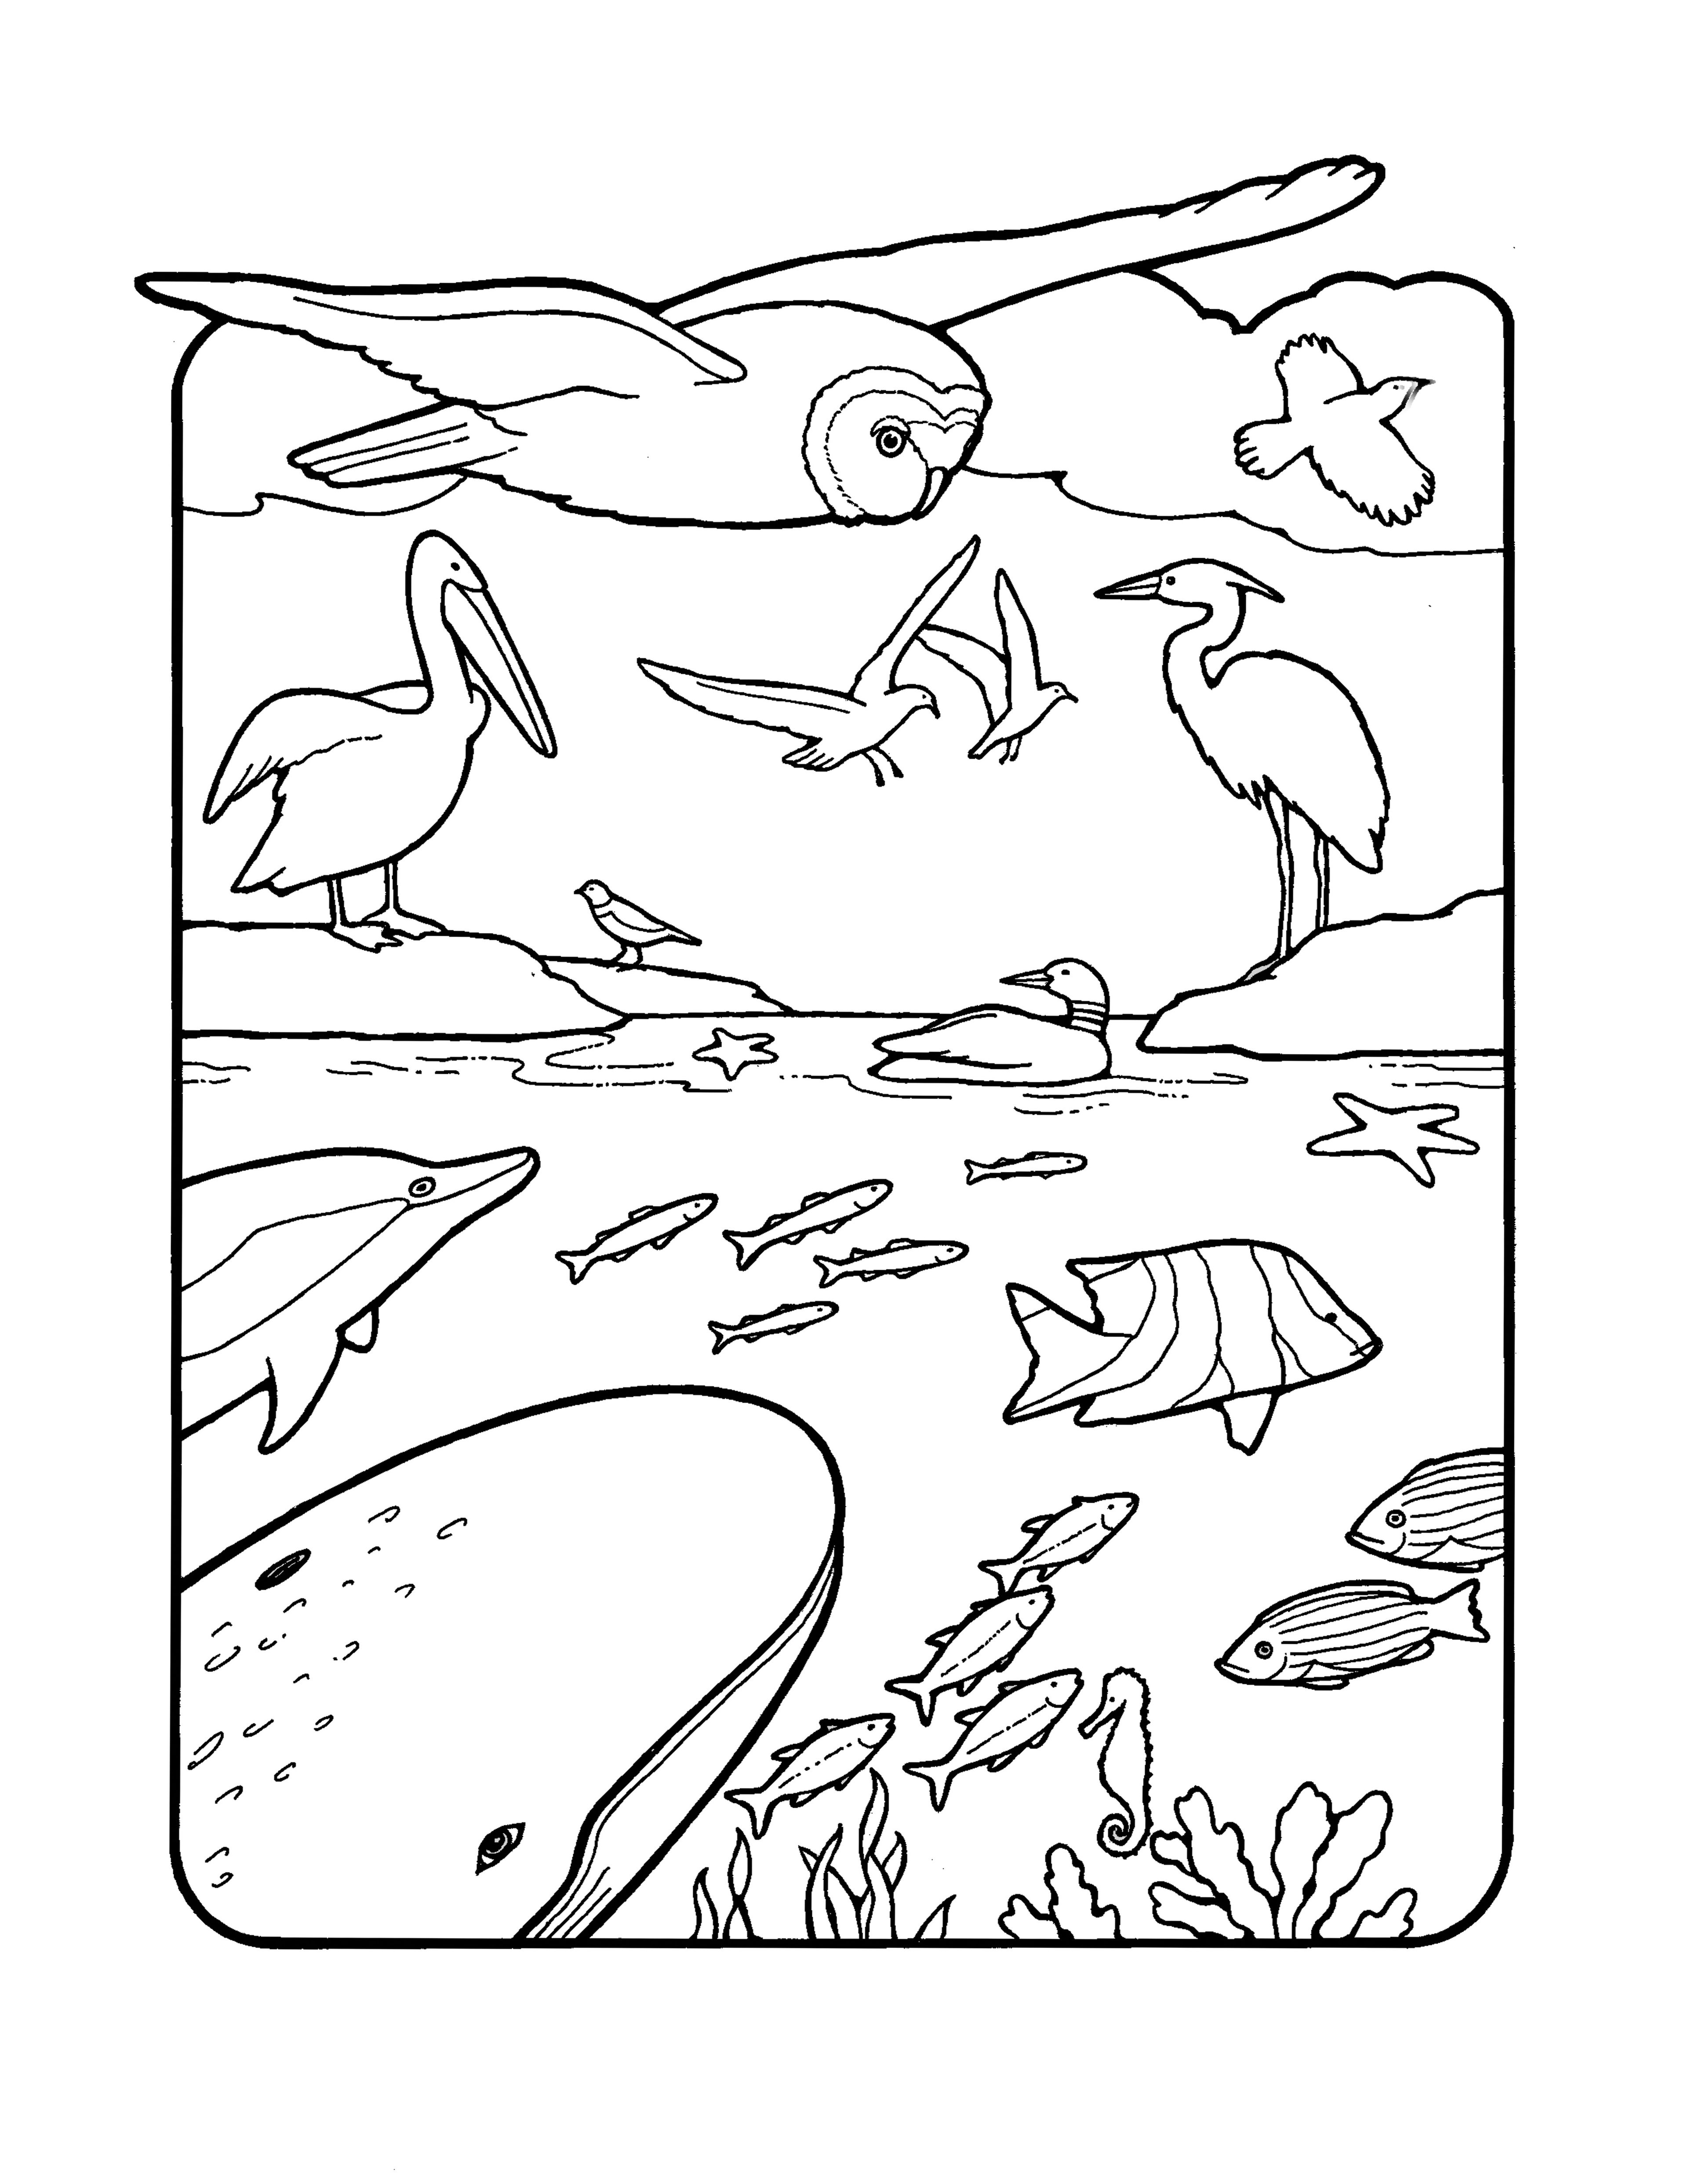 An illustration of sea life and birds above.